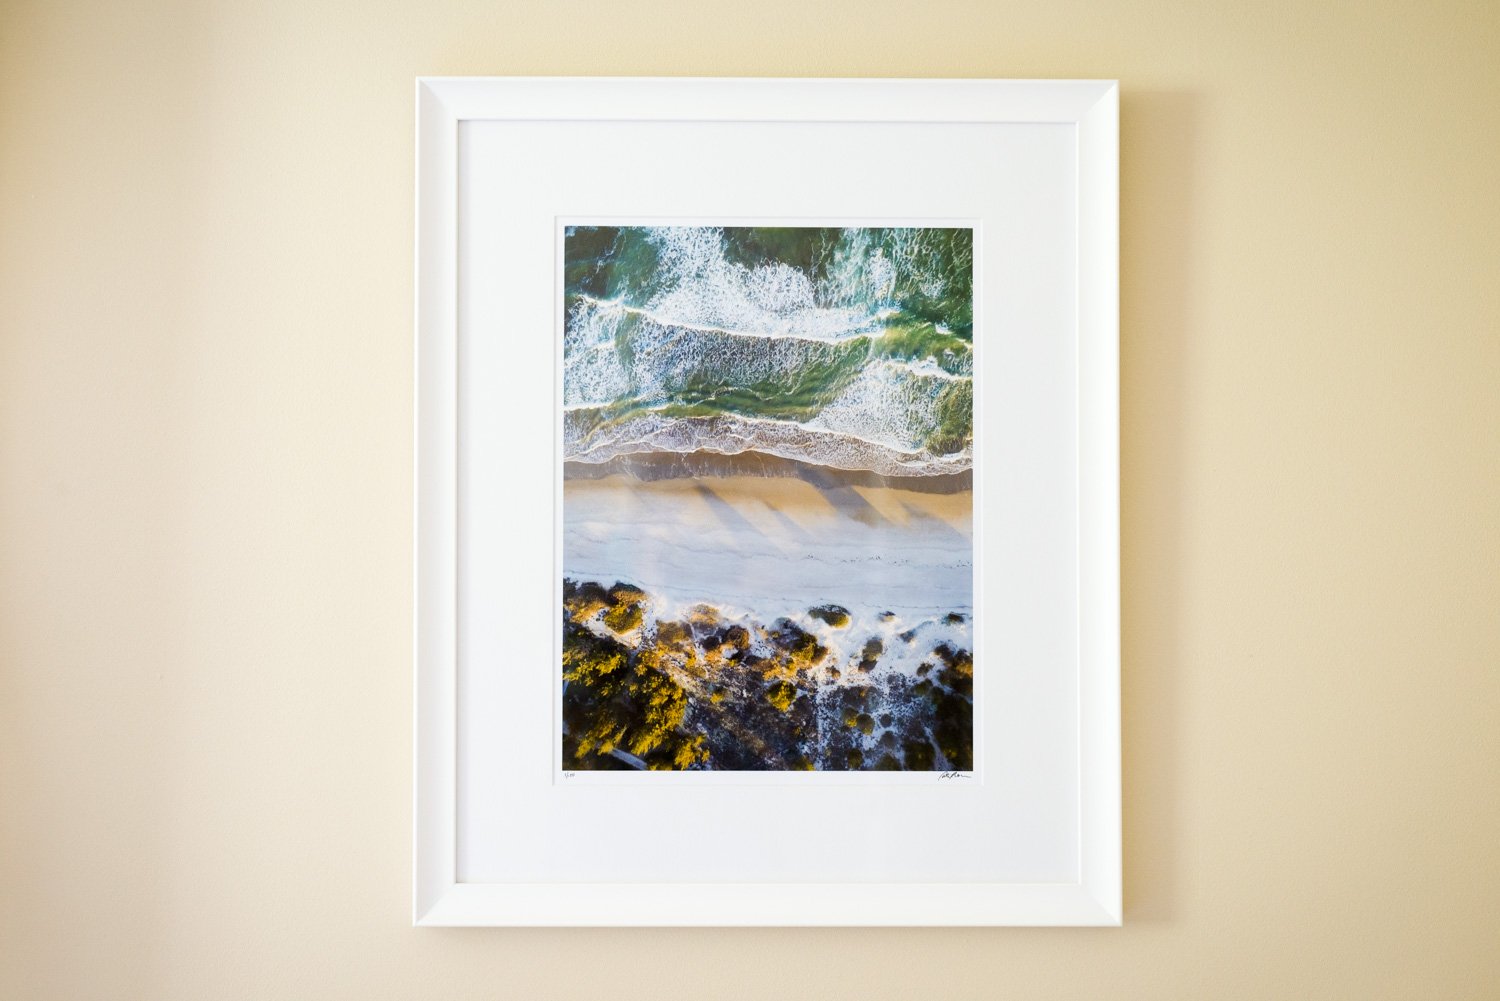 Cate Brown Photo Narragansett Aerial #1 // Framed Fine Art 20x26" // Limited Edition 1 of 150 Available Inventory Ocean Fine Art